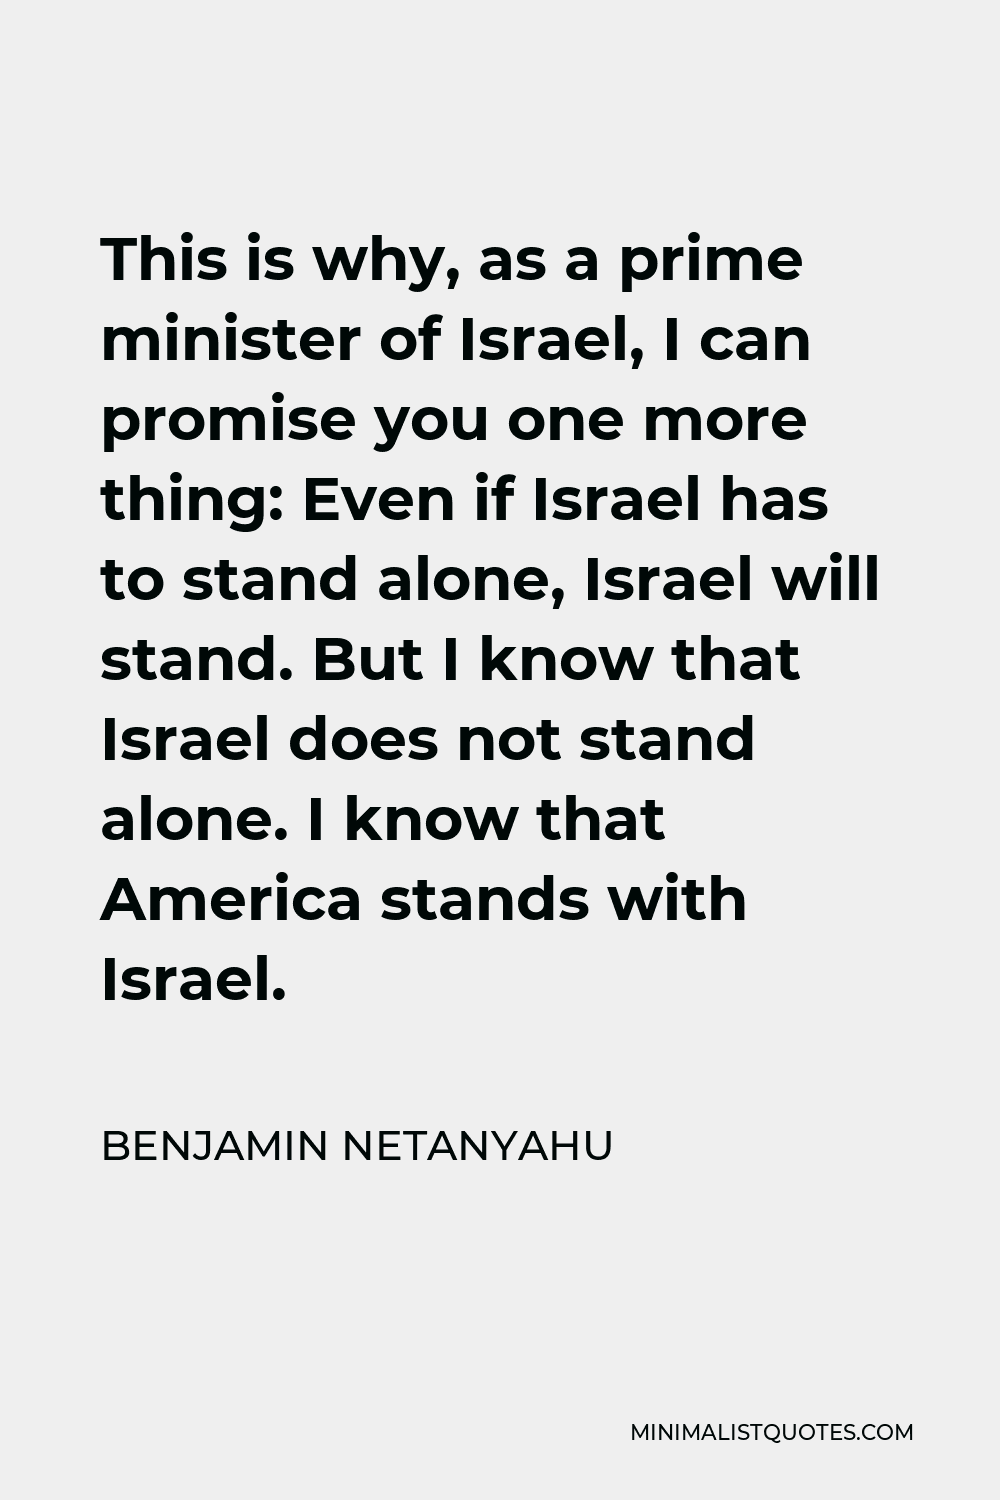 Benjamin Netanyahu Quote - This is why, as a prime minister of Israel, I can promise you one more thing: Even if Israel has to stand alone, Israel will stand. But I know that Israel does not stand alone. I know that America stands with Israel.